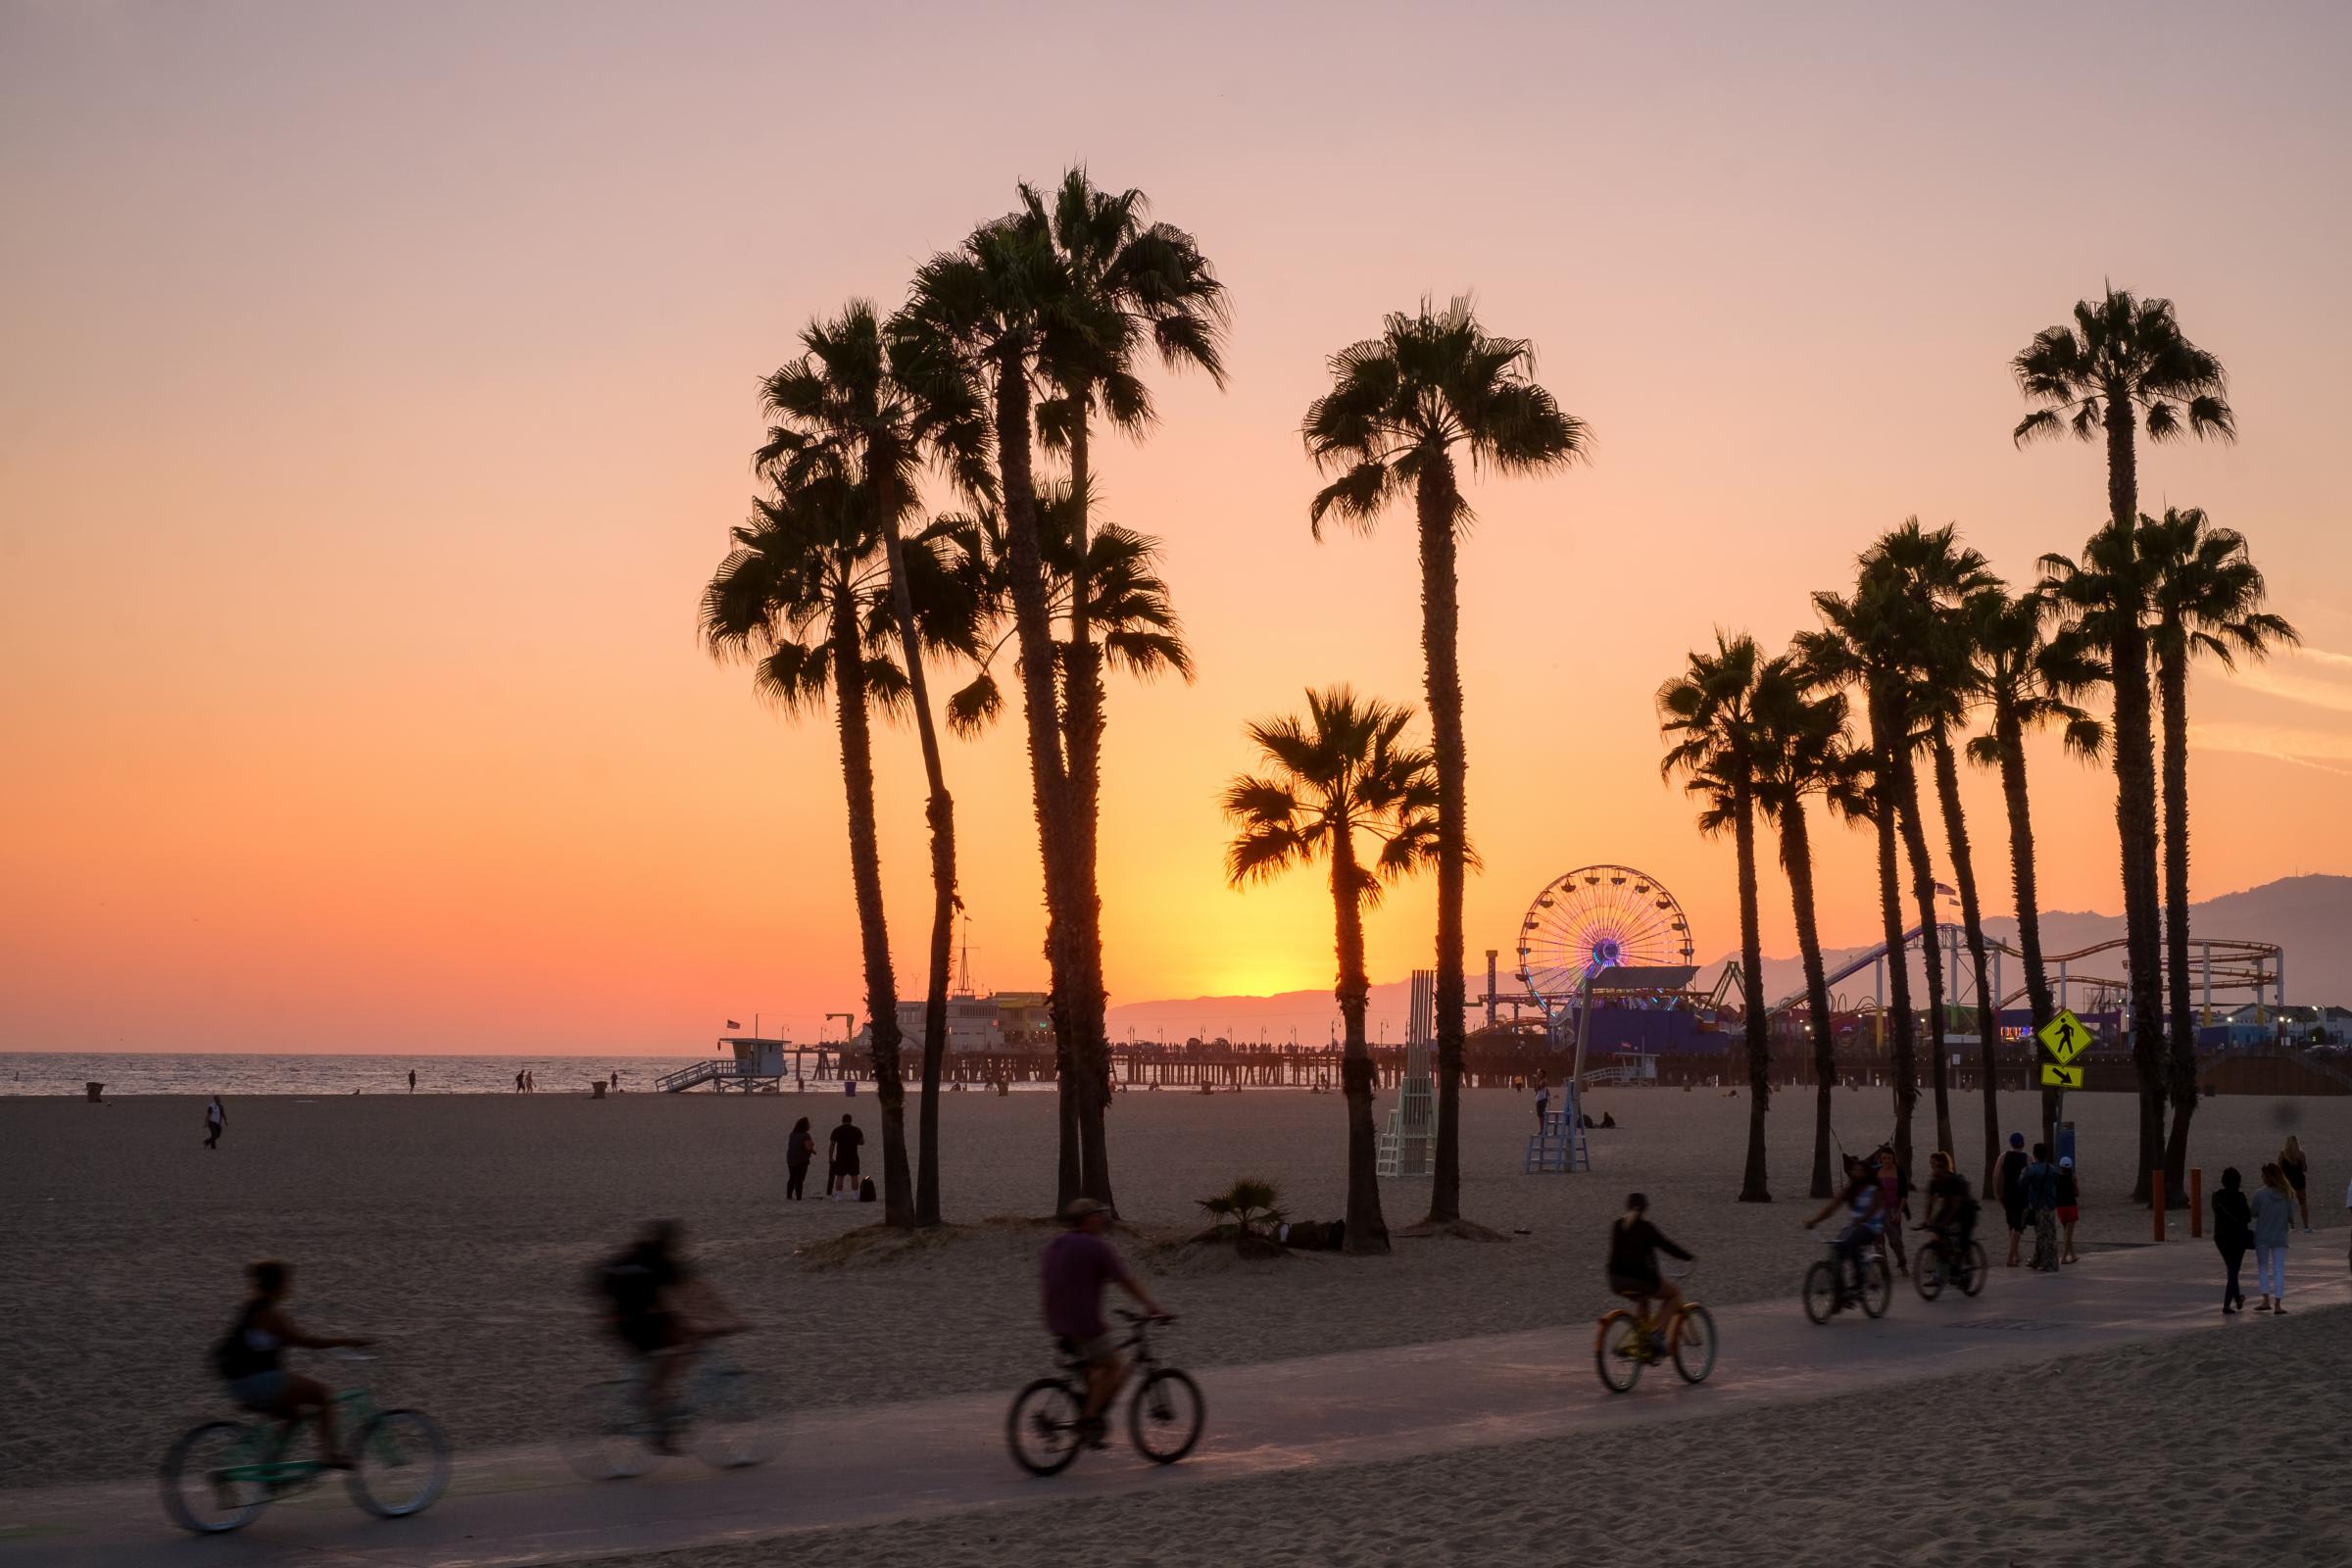 People ride bikes and walk along the beach at sunset in Santa Monica, California.